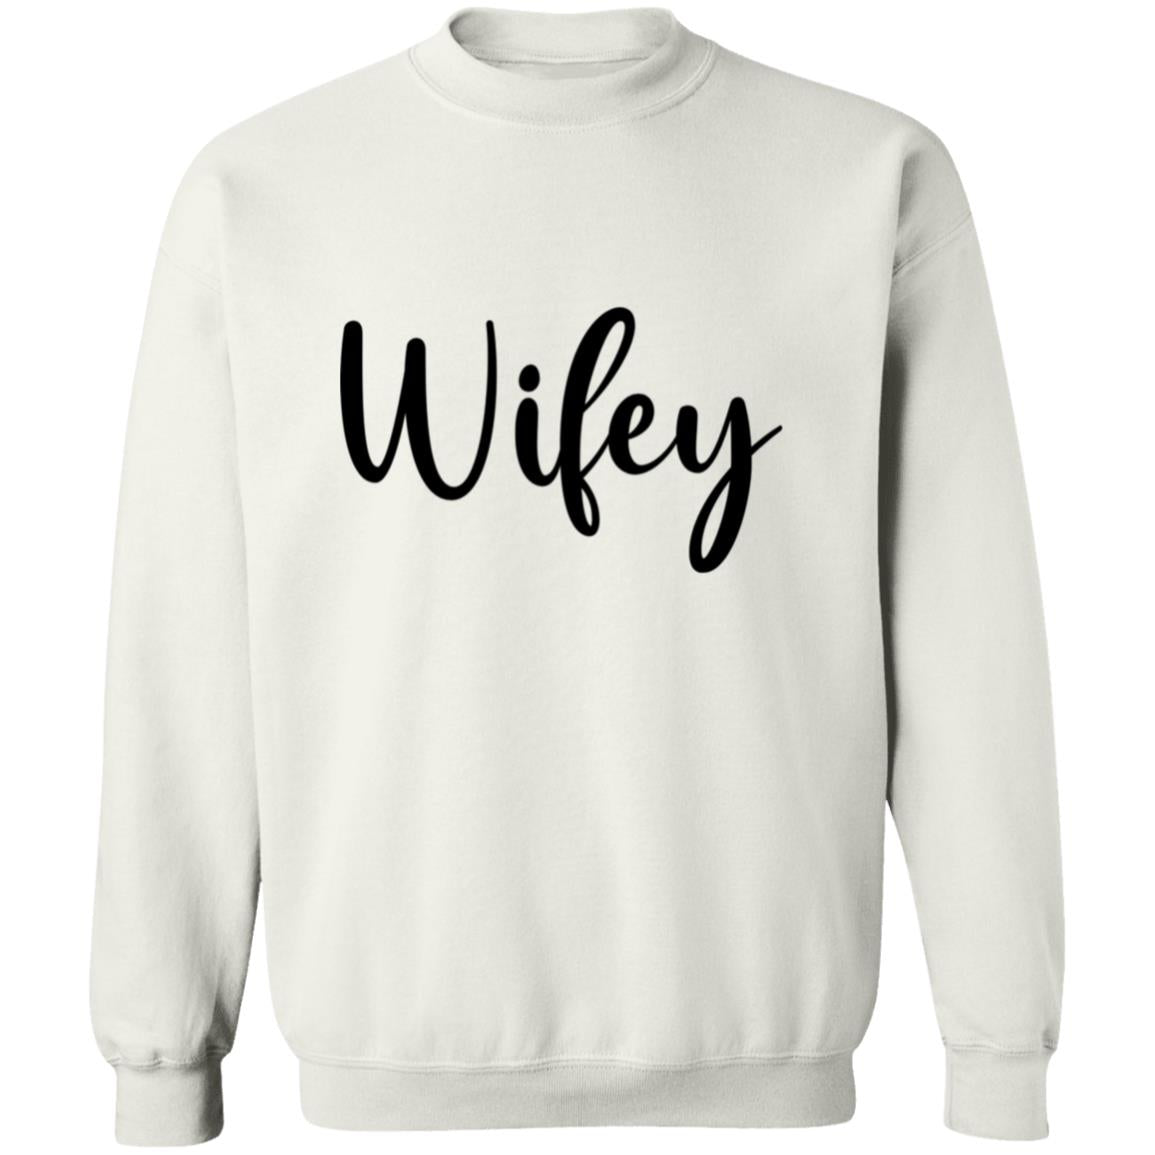 Get trendy with Wifey Wifey T shirt or crew neck sweatshirt - Apparel available at Good Gift Company. Grab yours for $21.59 today!